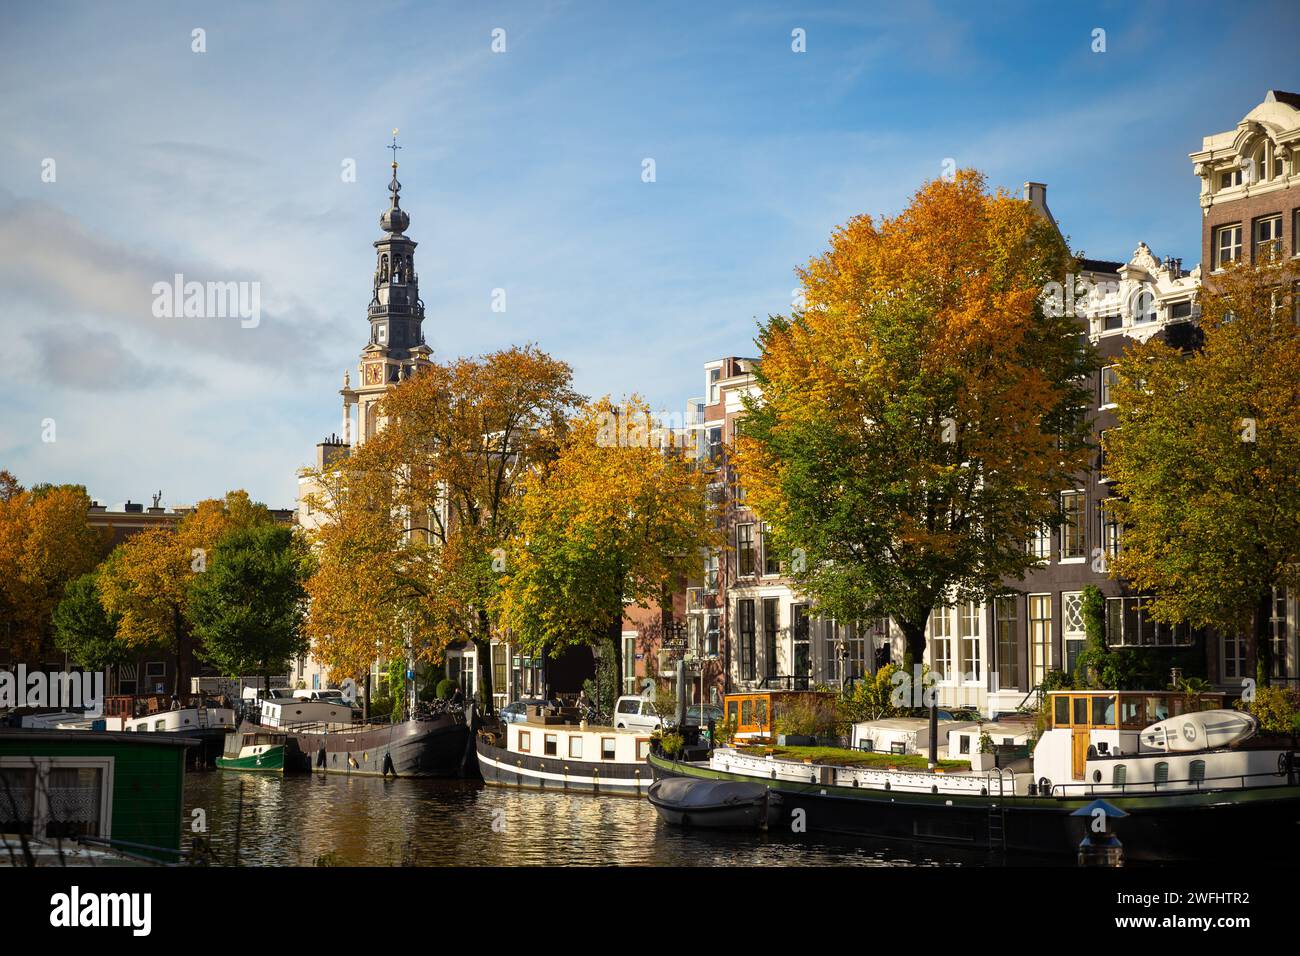 Amsterdam canal and houseboat/ townhouse with autumn colorful trees, Amsterdam Stock Photo